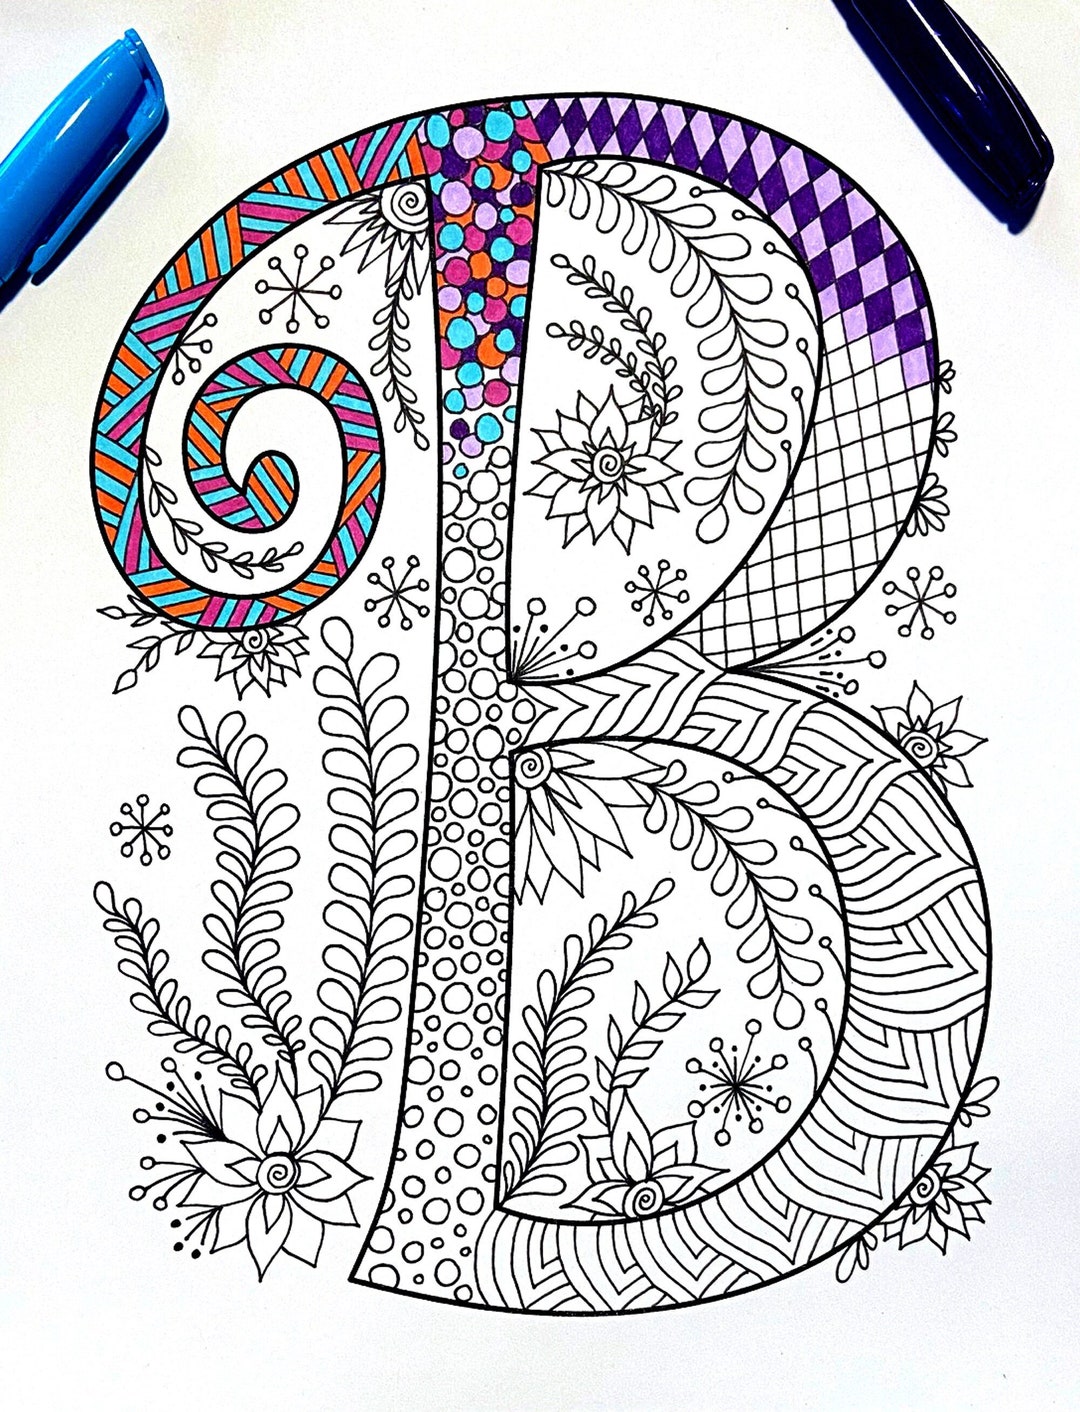 Retro Floral Letter B Coloring Page Inspired by the Font - Etsy